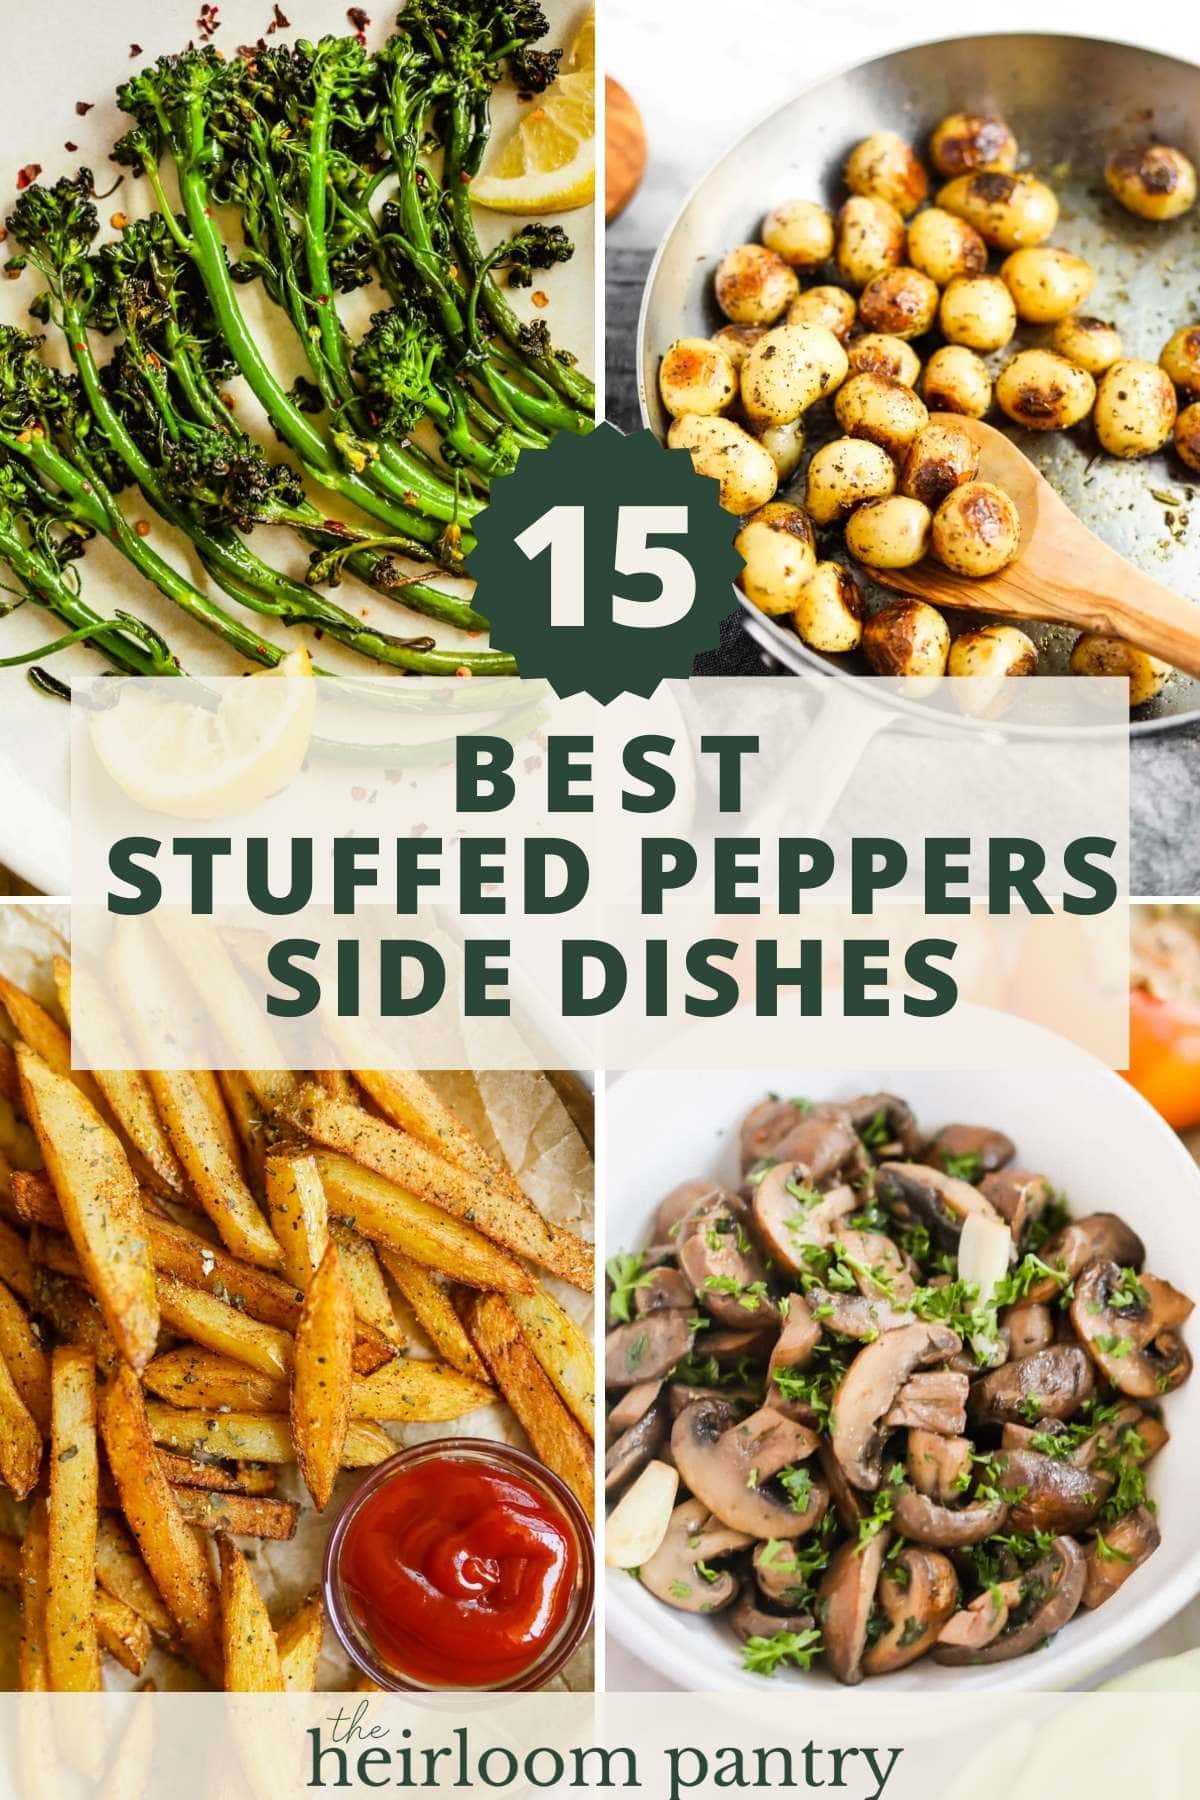 Sides for stuffed peppers, including broccolini, potatoes, fries, and mushrooms, plus 11 other sides.